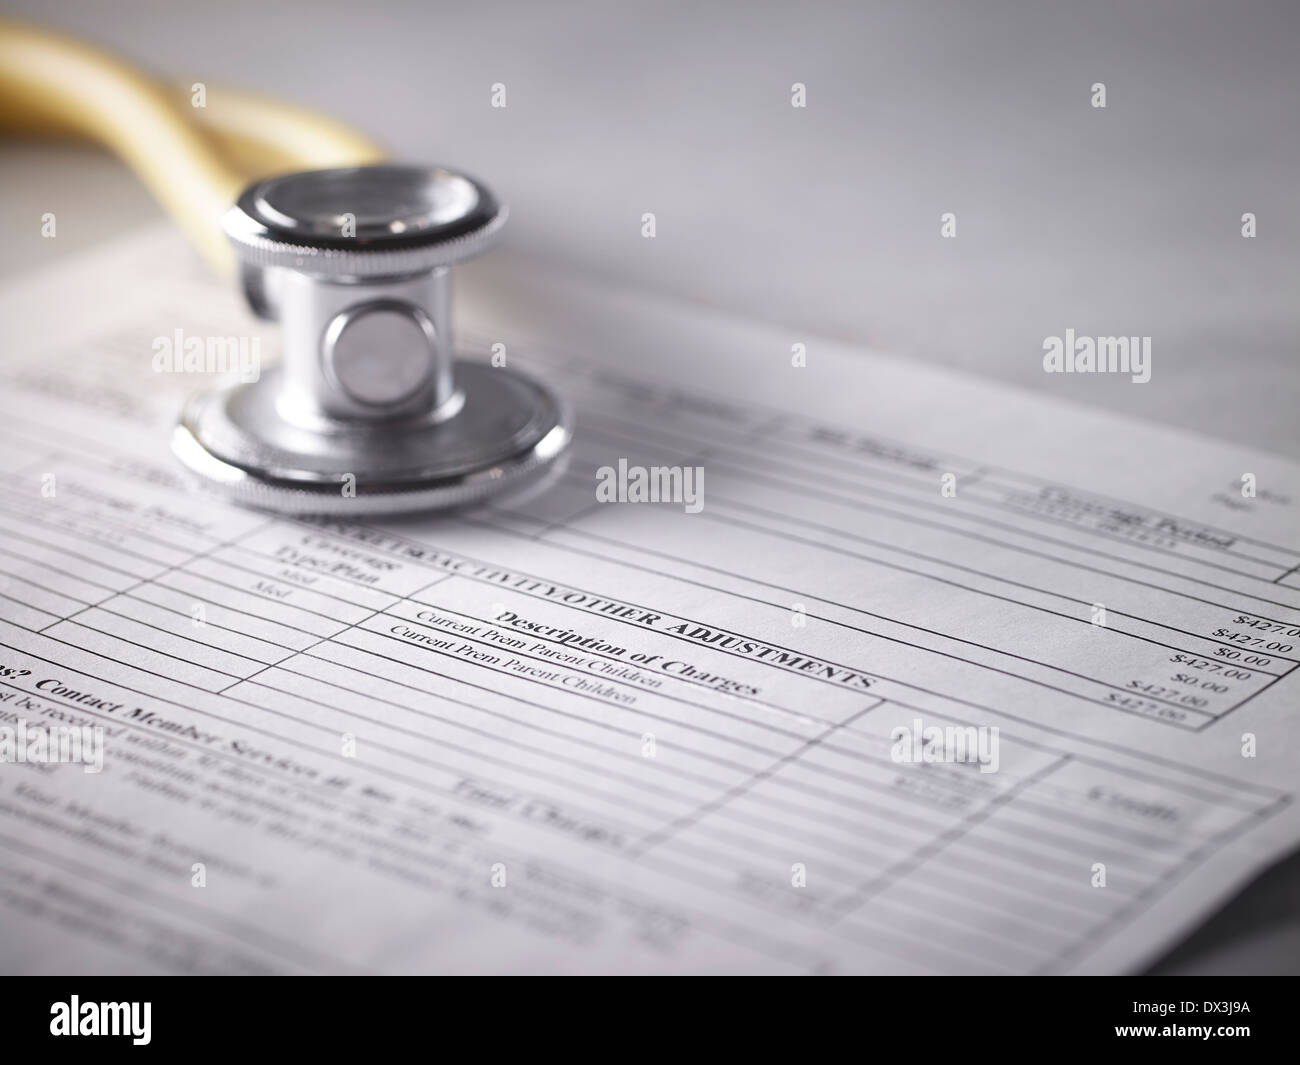 Stethoscope On Insurance Forms Paperwork Stock Photo